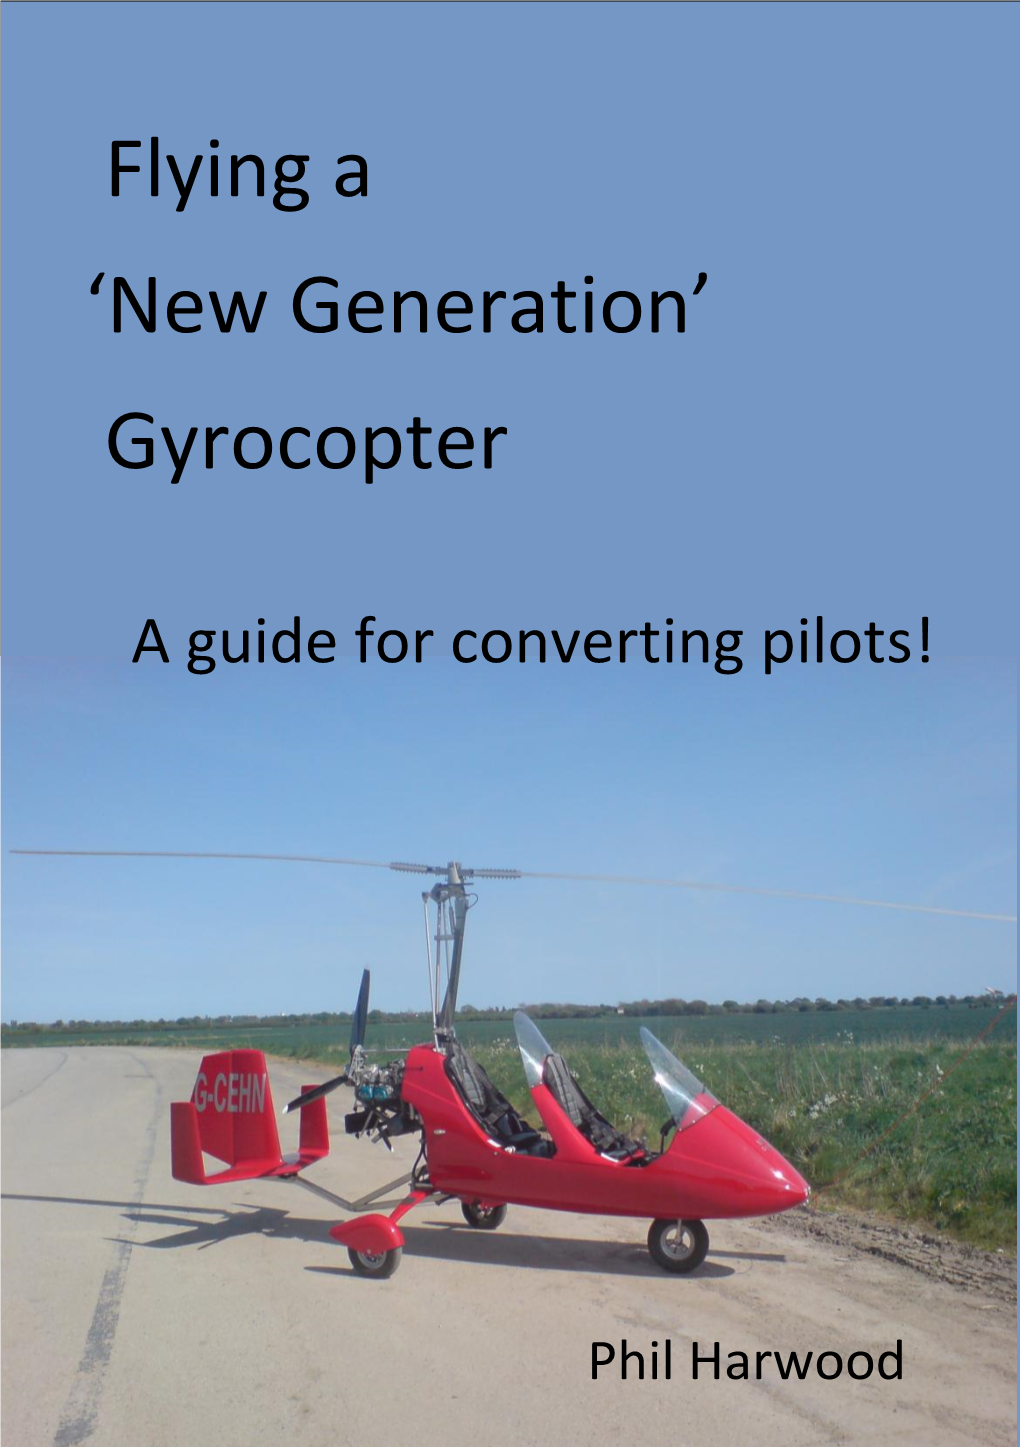 Flying a 'New Generation'